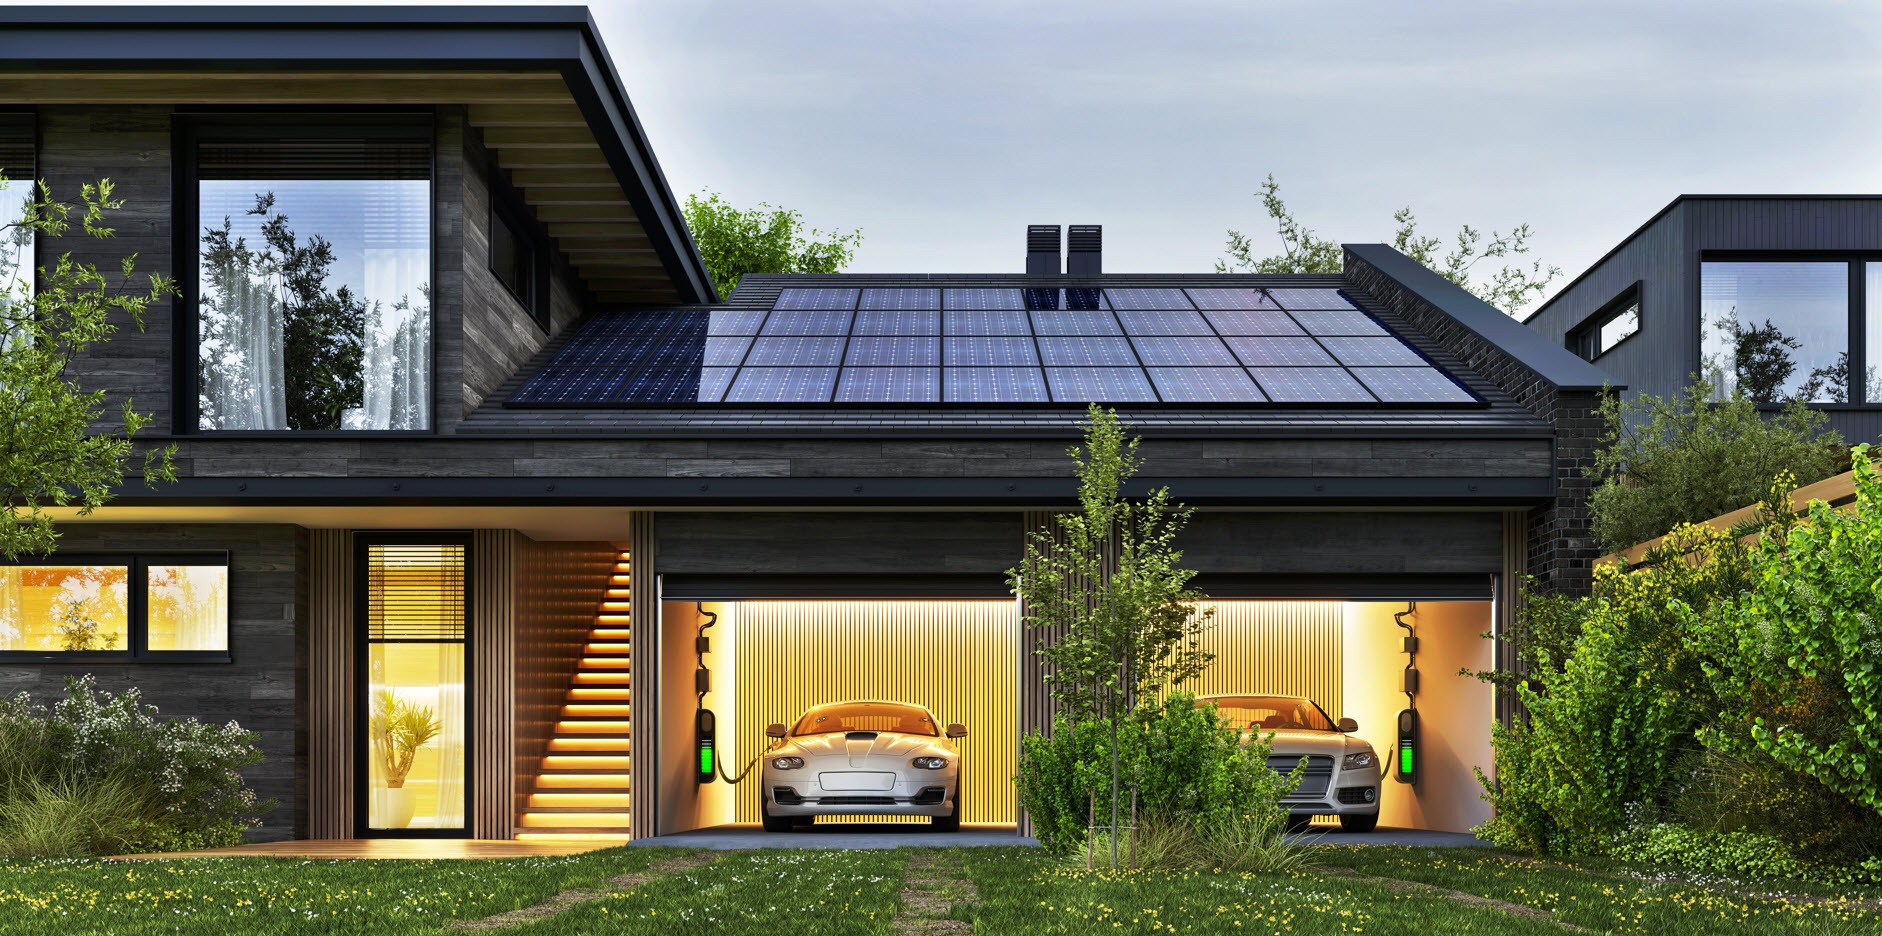 Solar energy install using photovoltaic panels, solar storage, and ev chargers